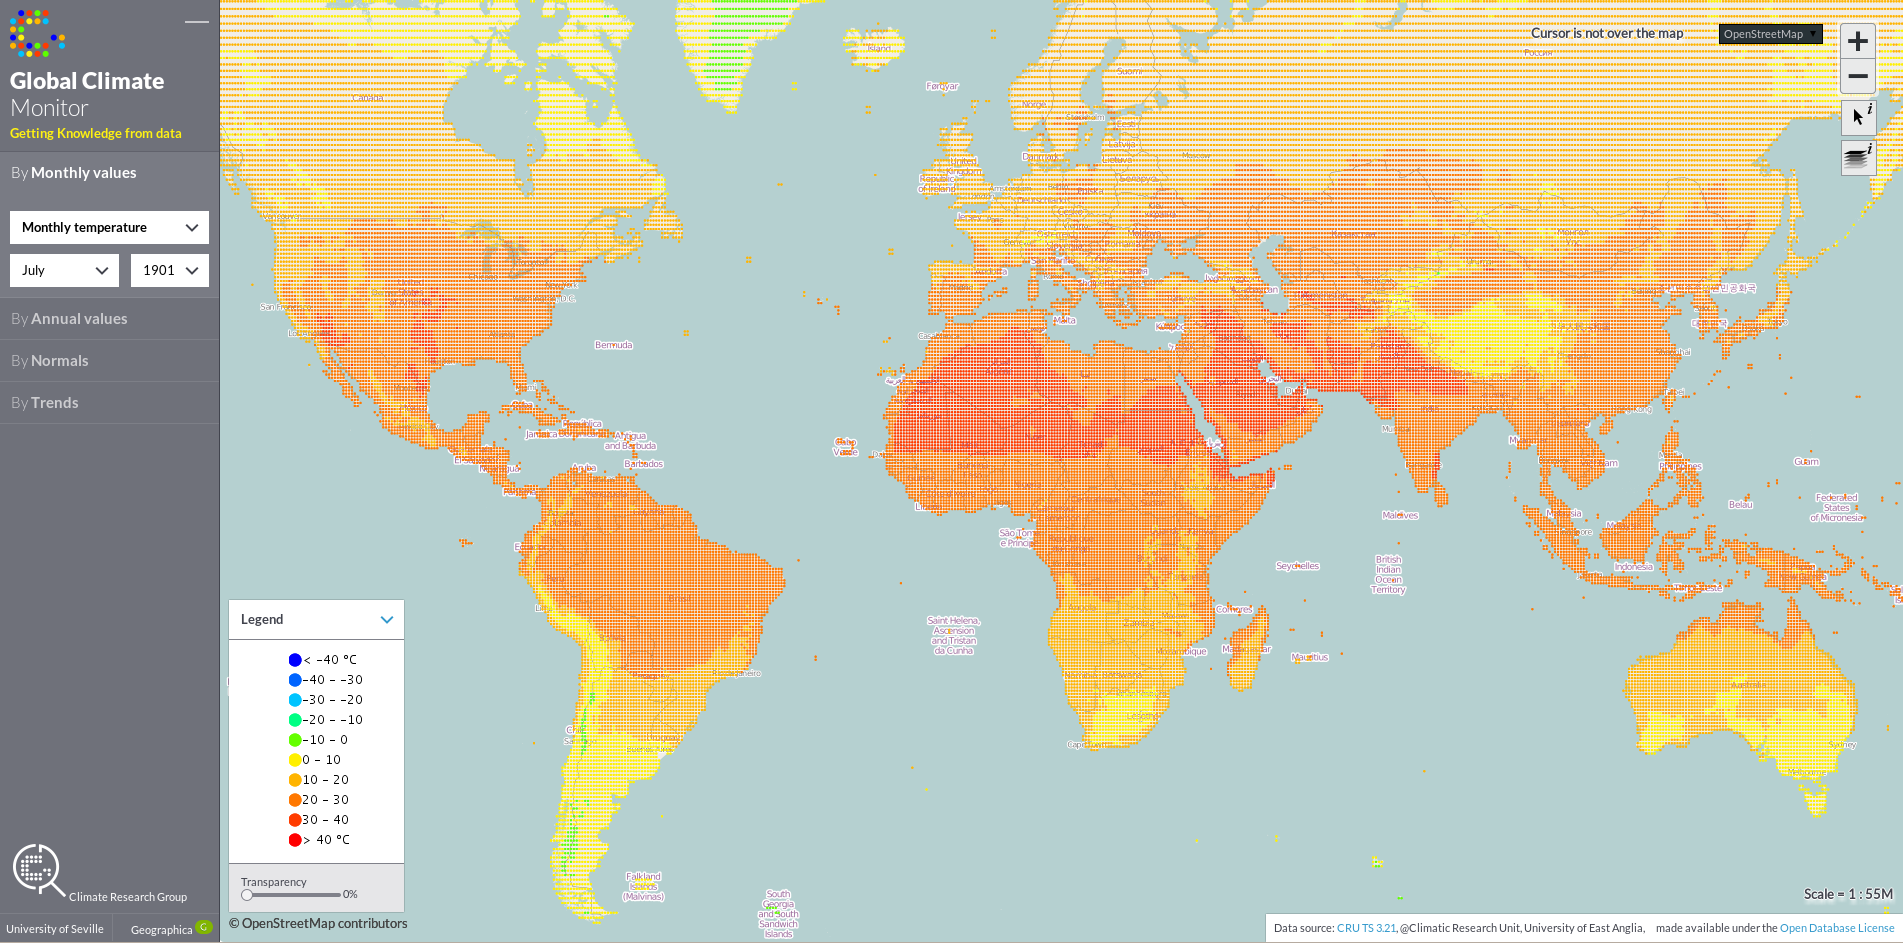 Global Climate Monitor - Monthly Temperature - July 1901